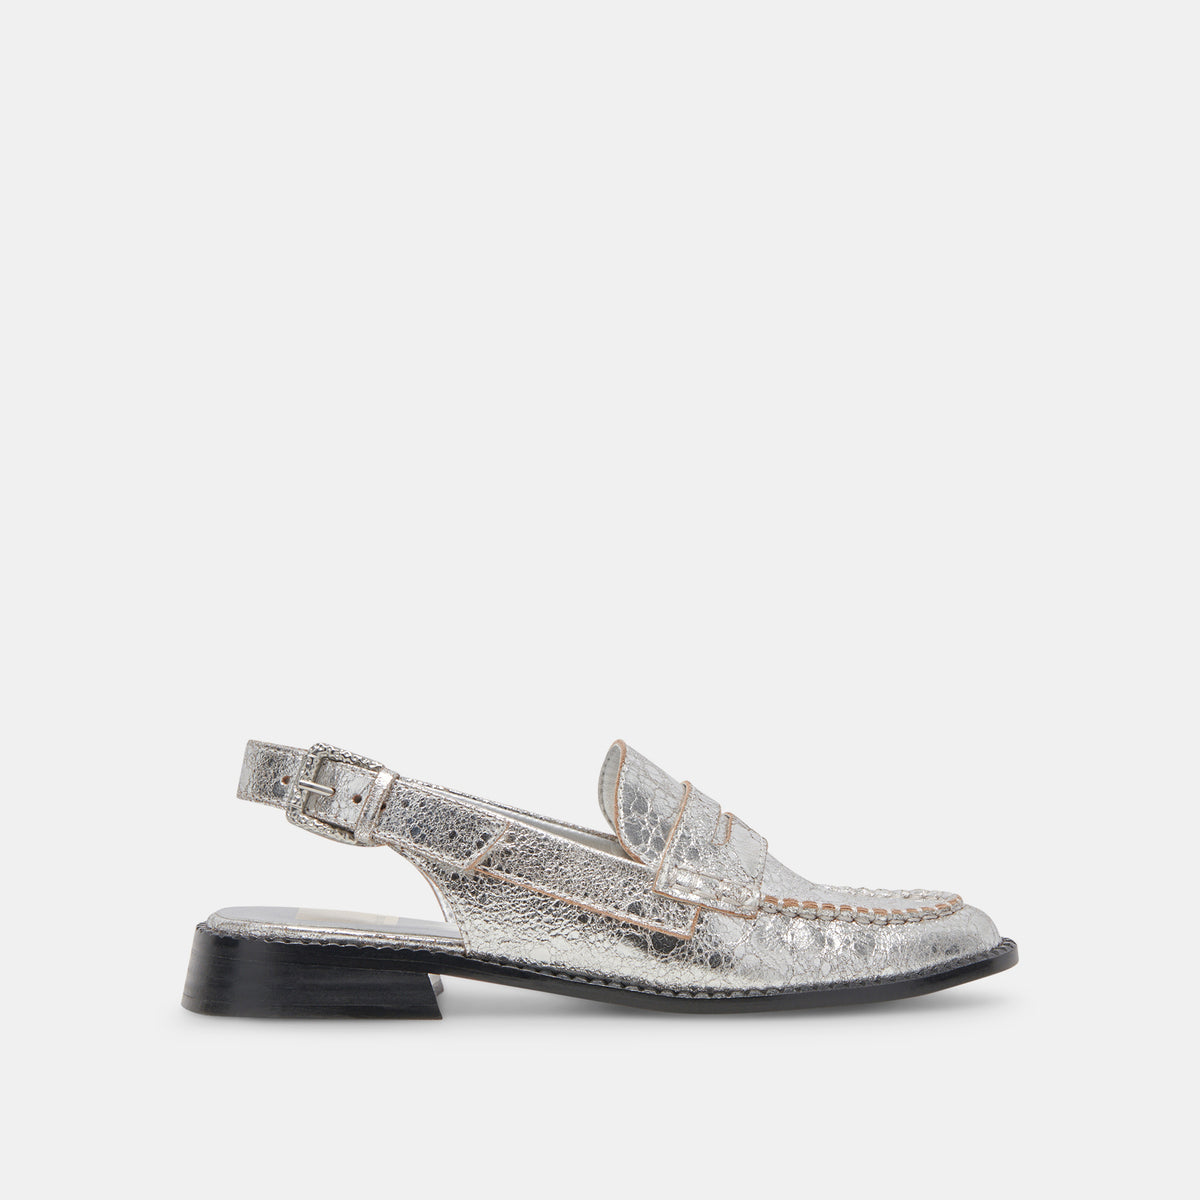 HARDI LOAFERS SILVER CRACKLED LEATHER – Dolce Vita